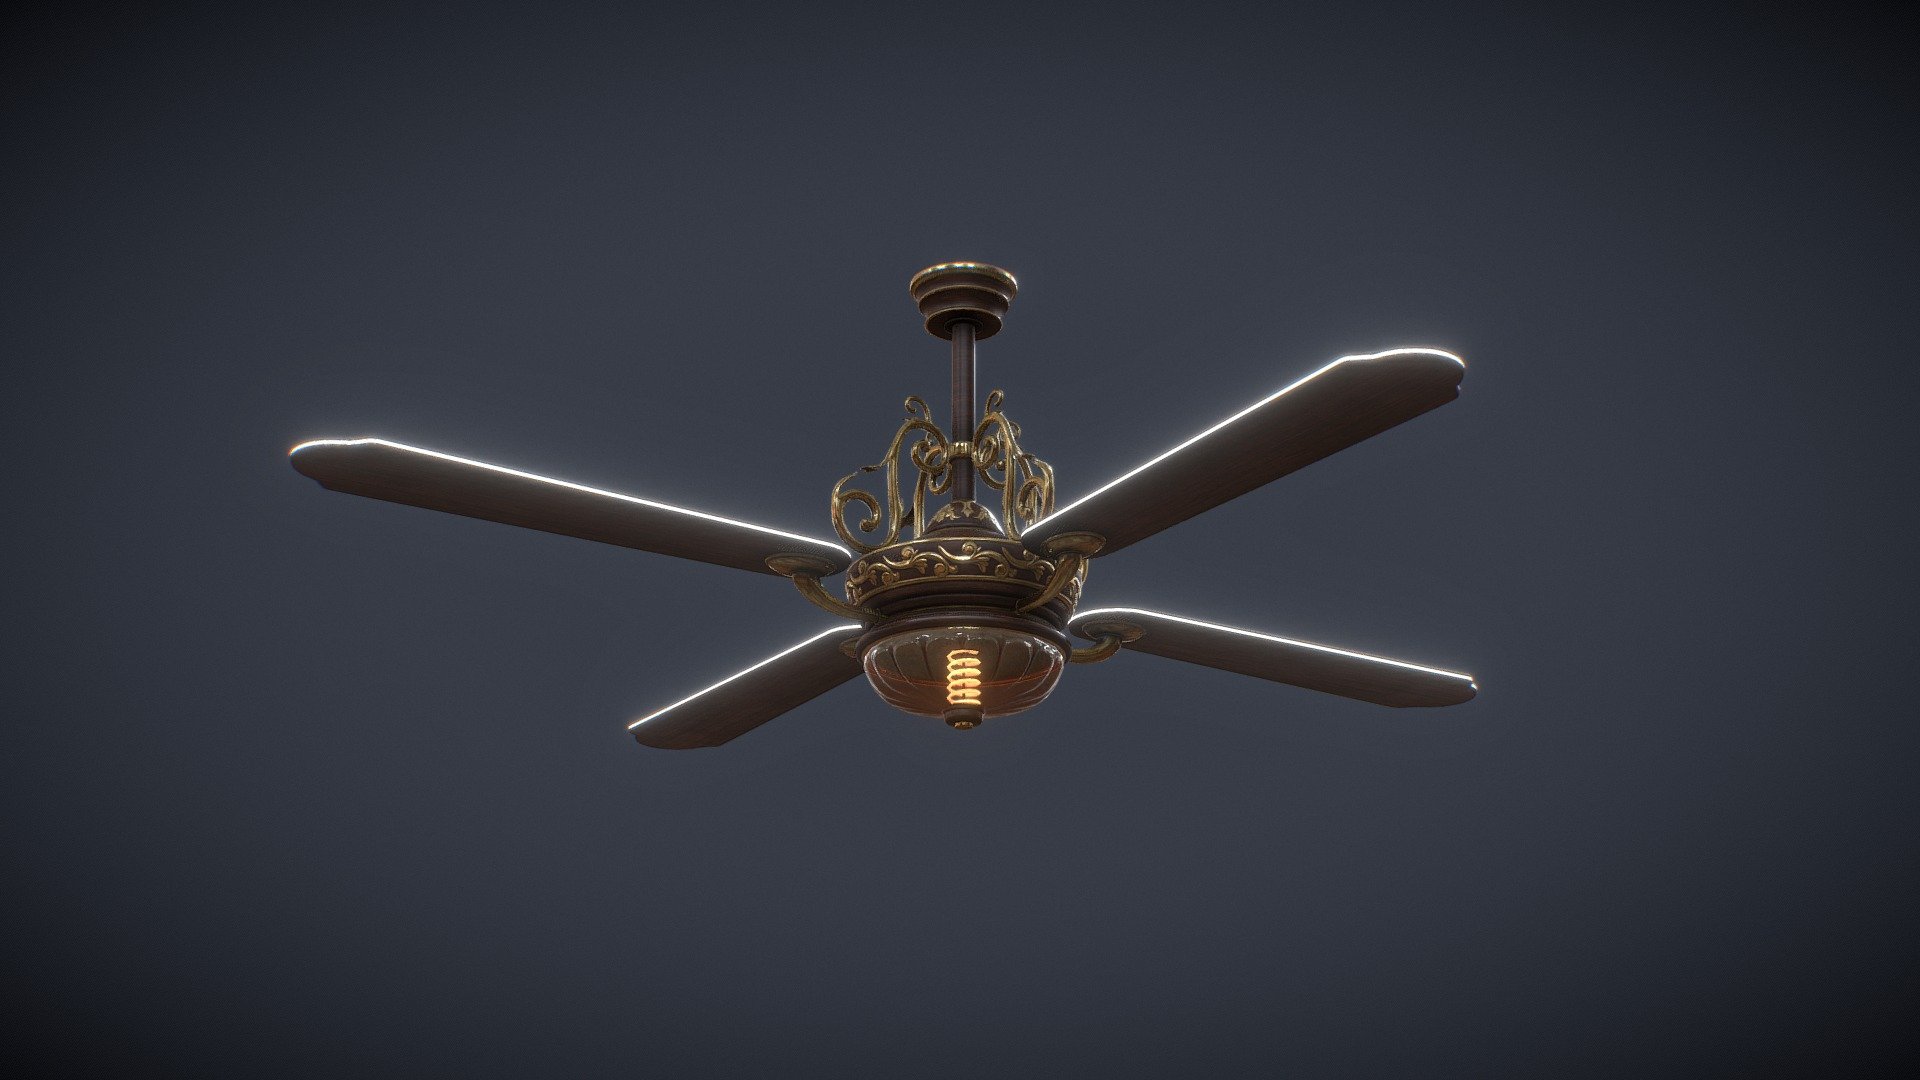 Hello All :) This is a desk ventilator lamp made for a personal victorian project. Ligth and shine !

Made with Maya, PS and Substance.

You will find in the package Scene file, FBX and 4k Textures.
If you have any customs need, please feel free to contact me 3d model